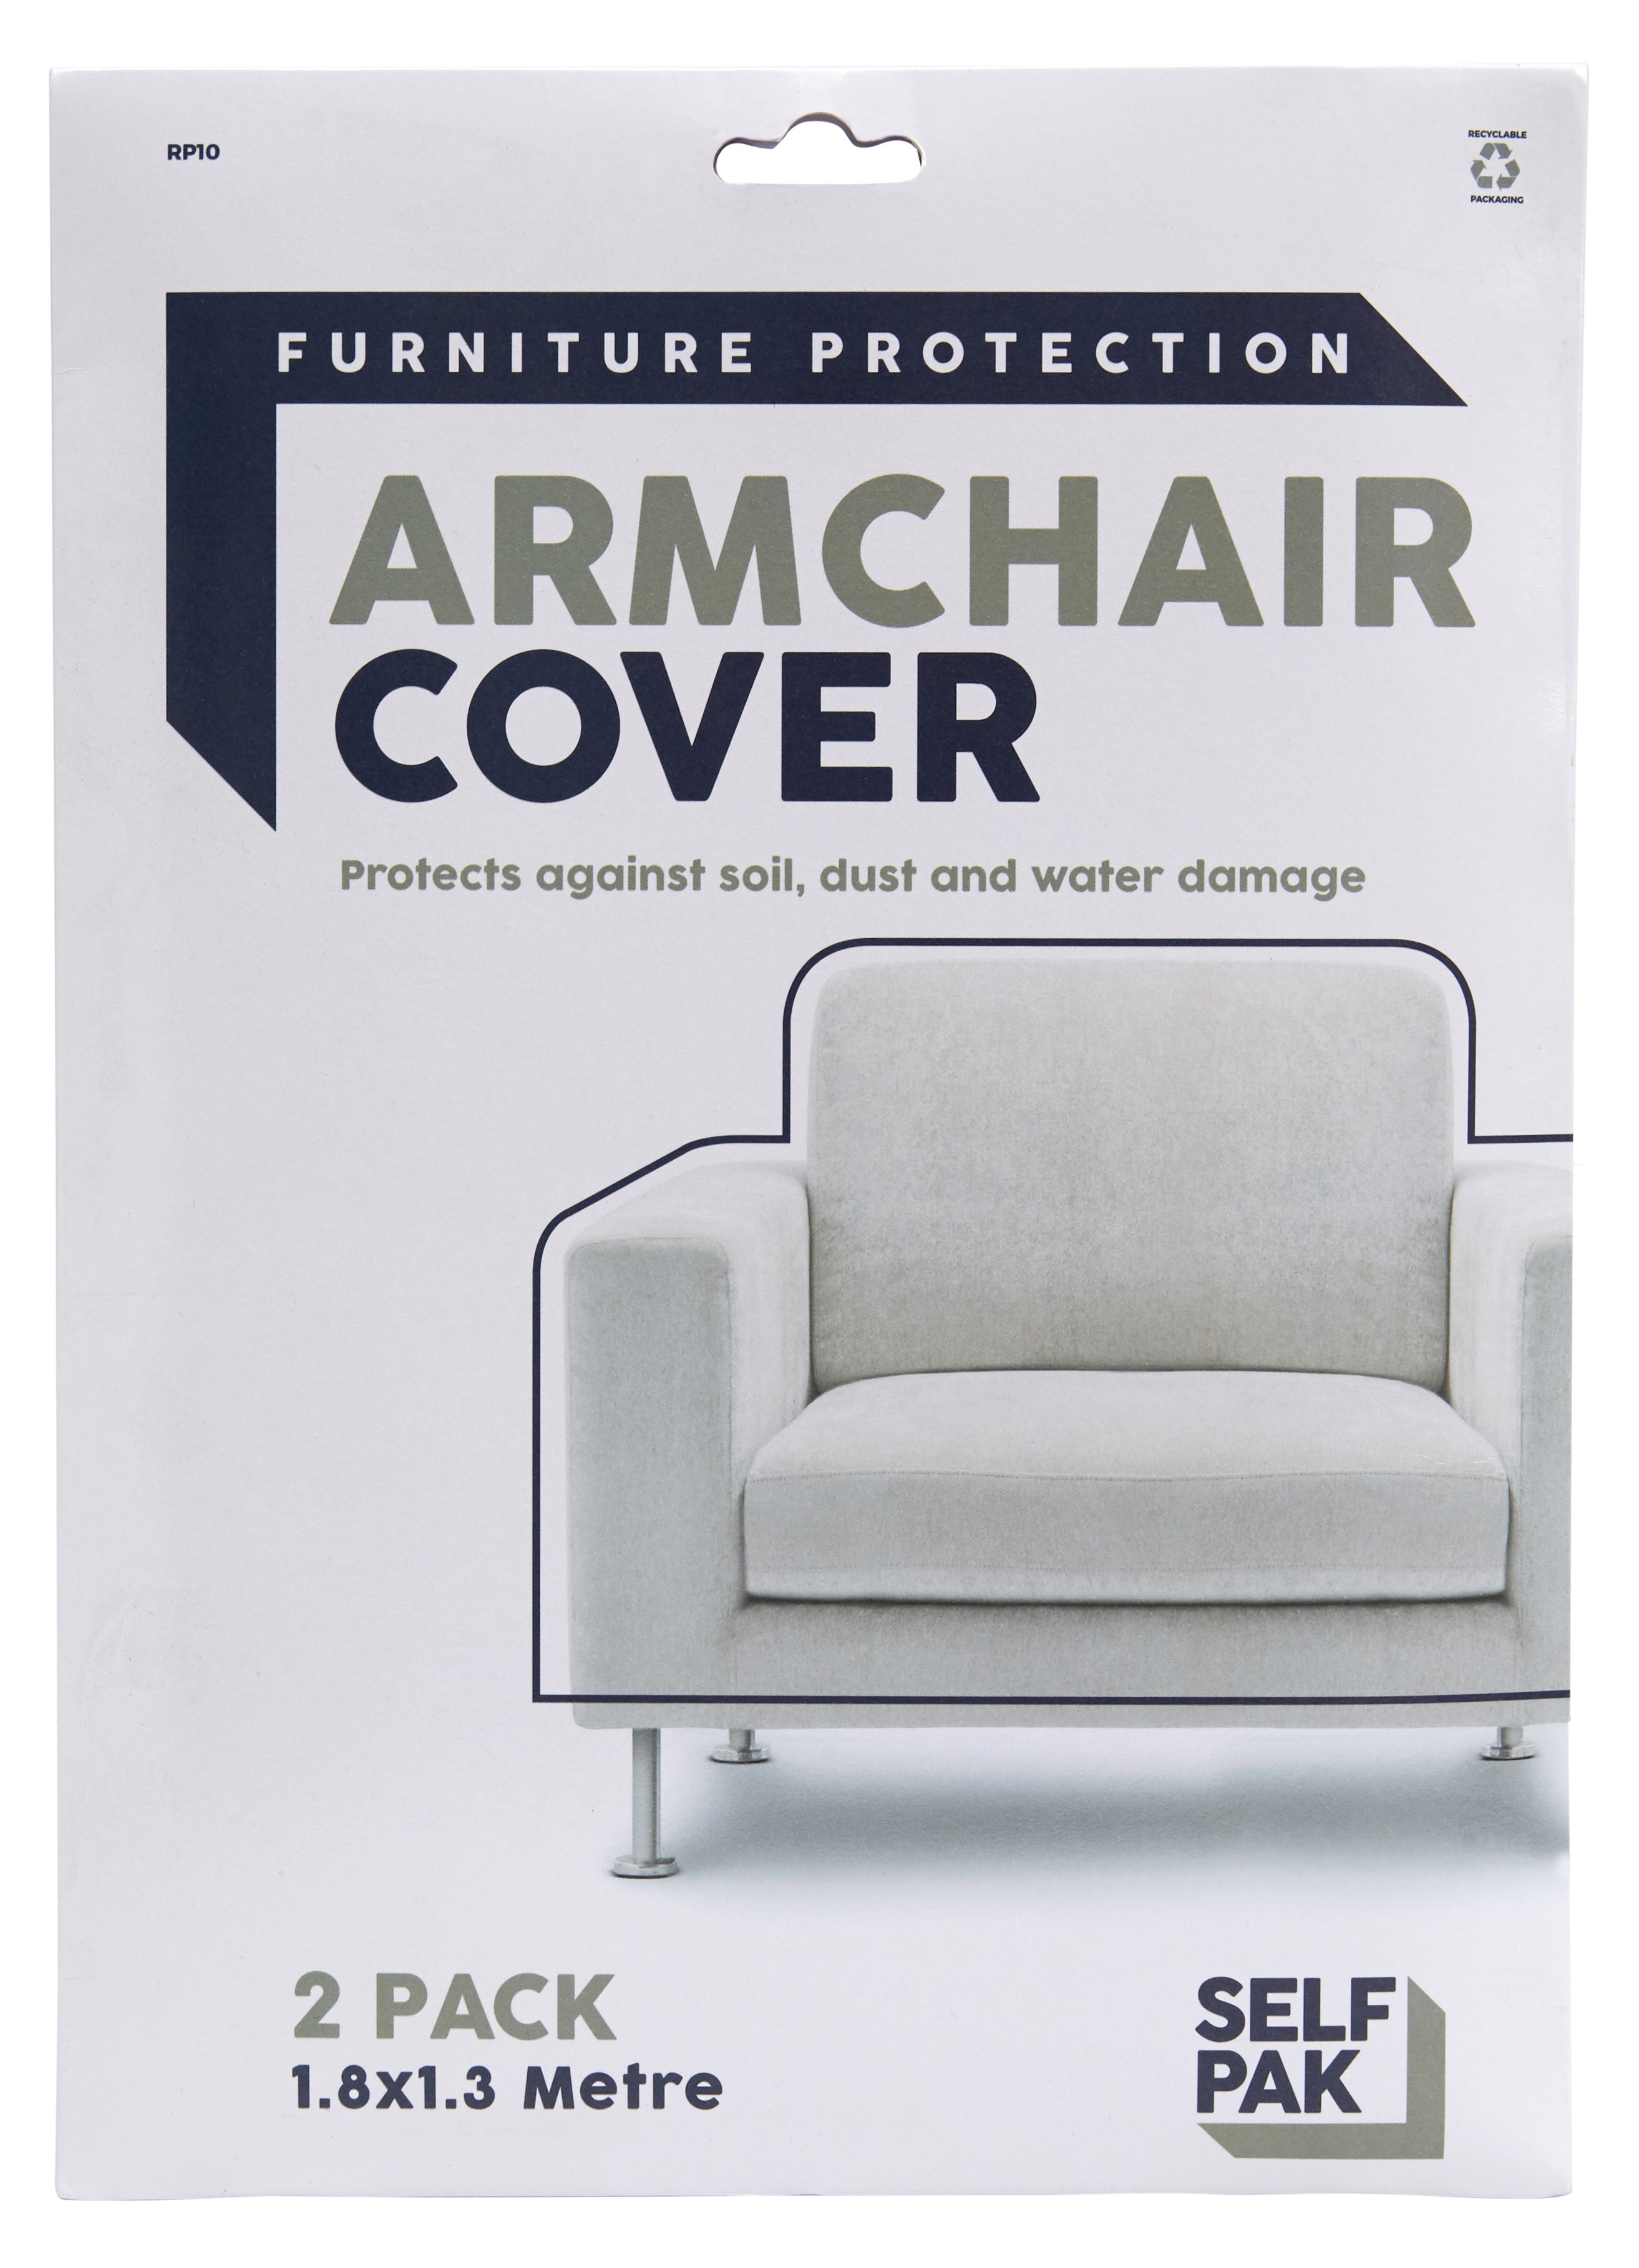 Armchair Covers & Protection